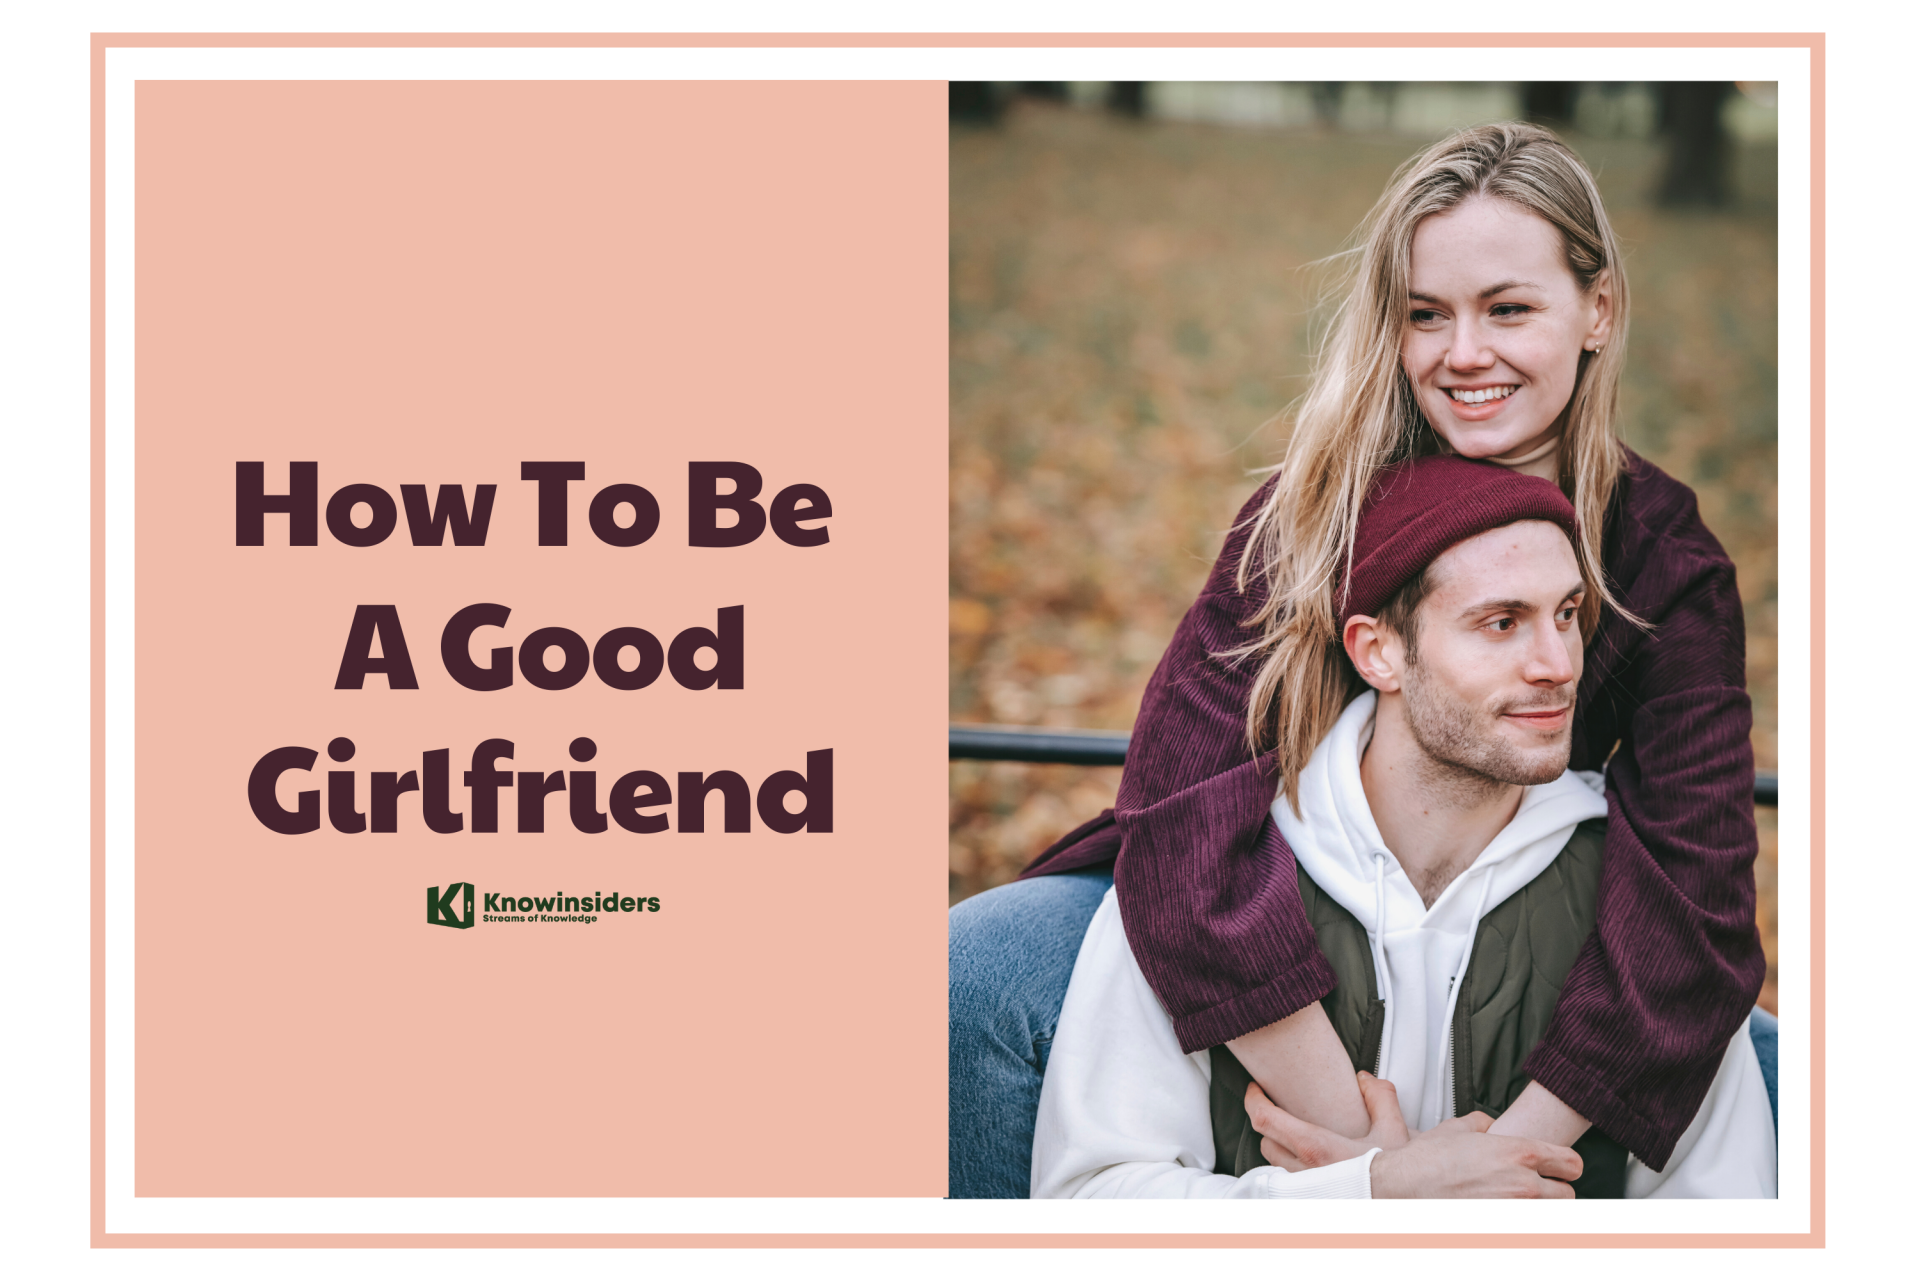 How To Be A Good Girlfriend In Simpliest Ways